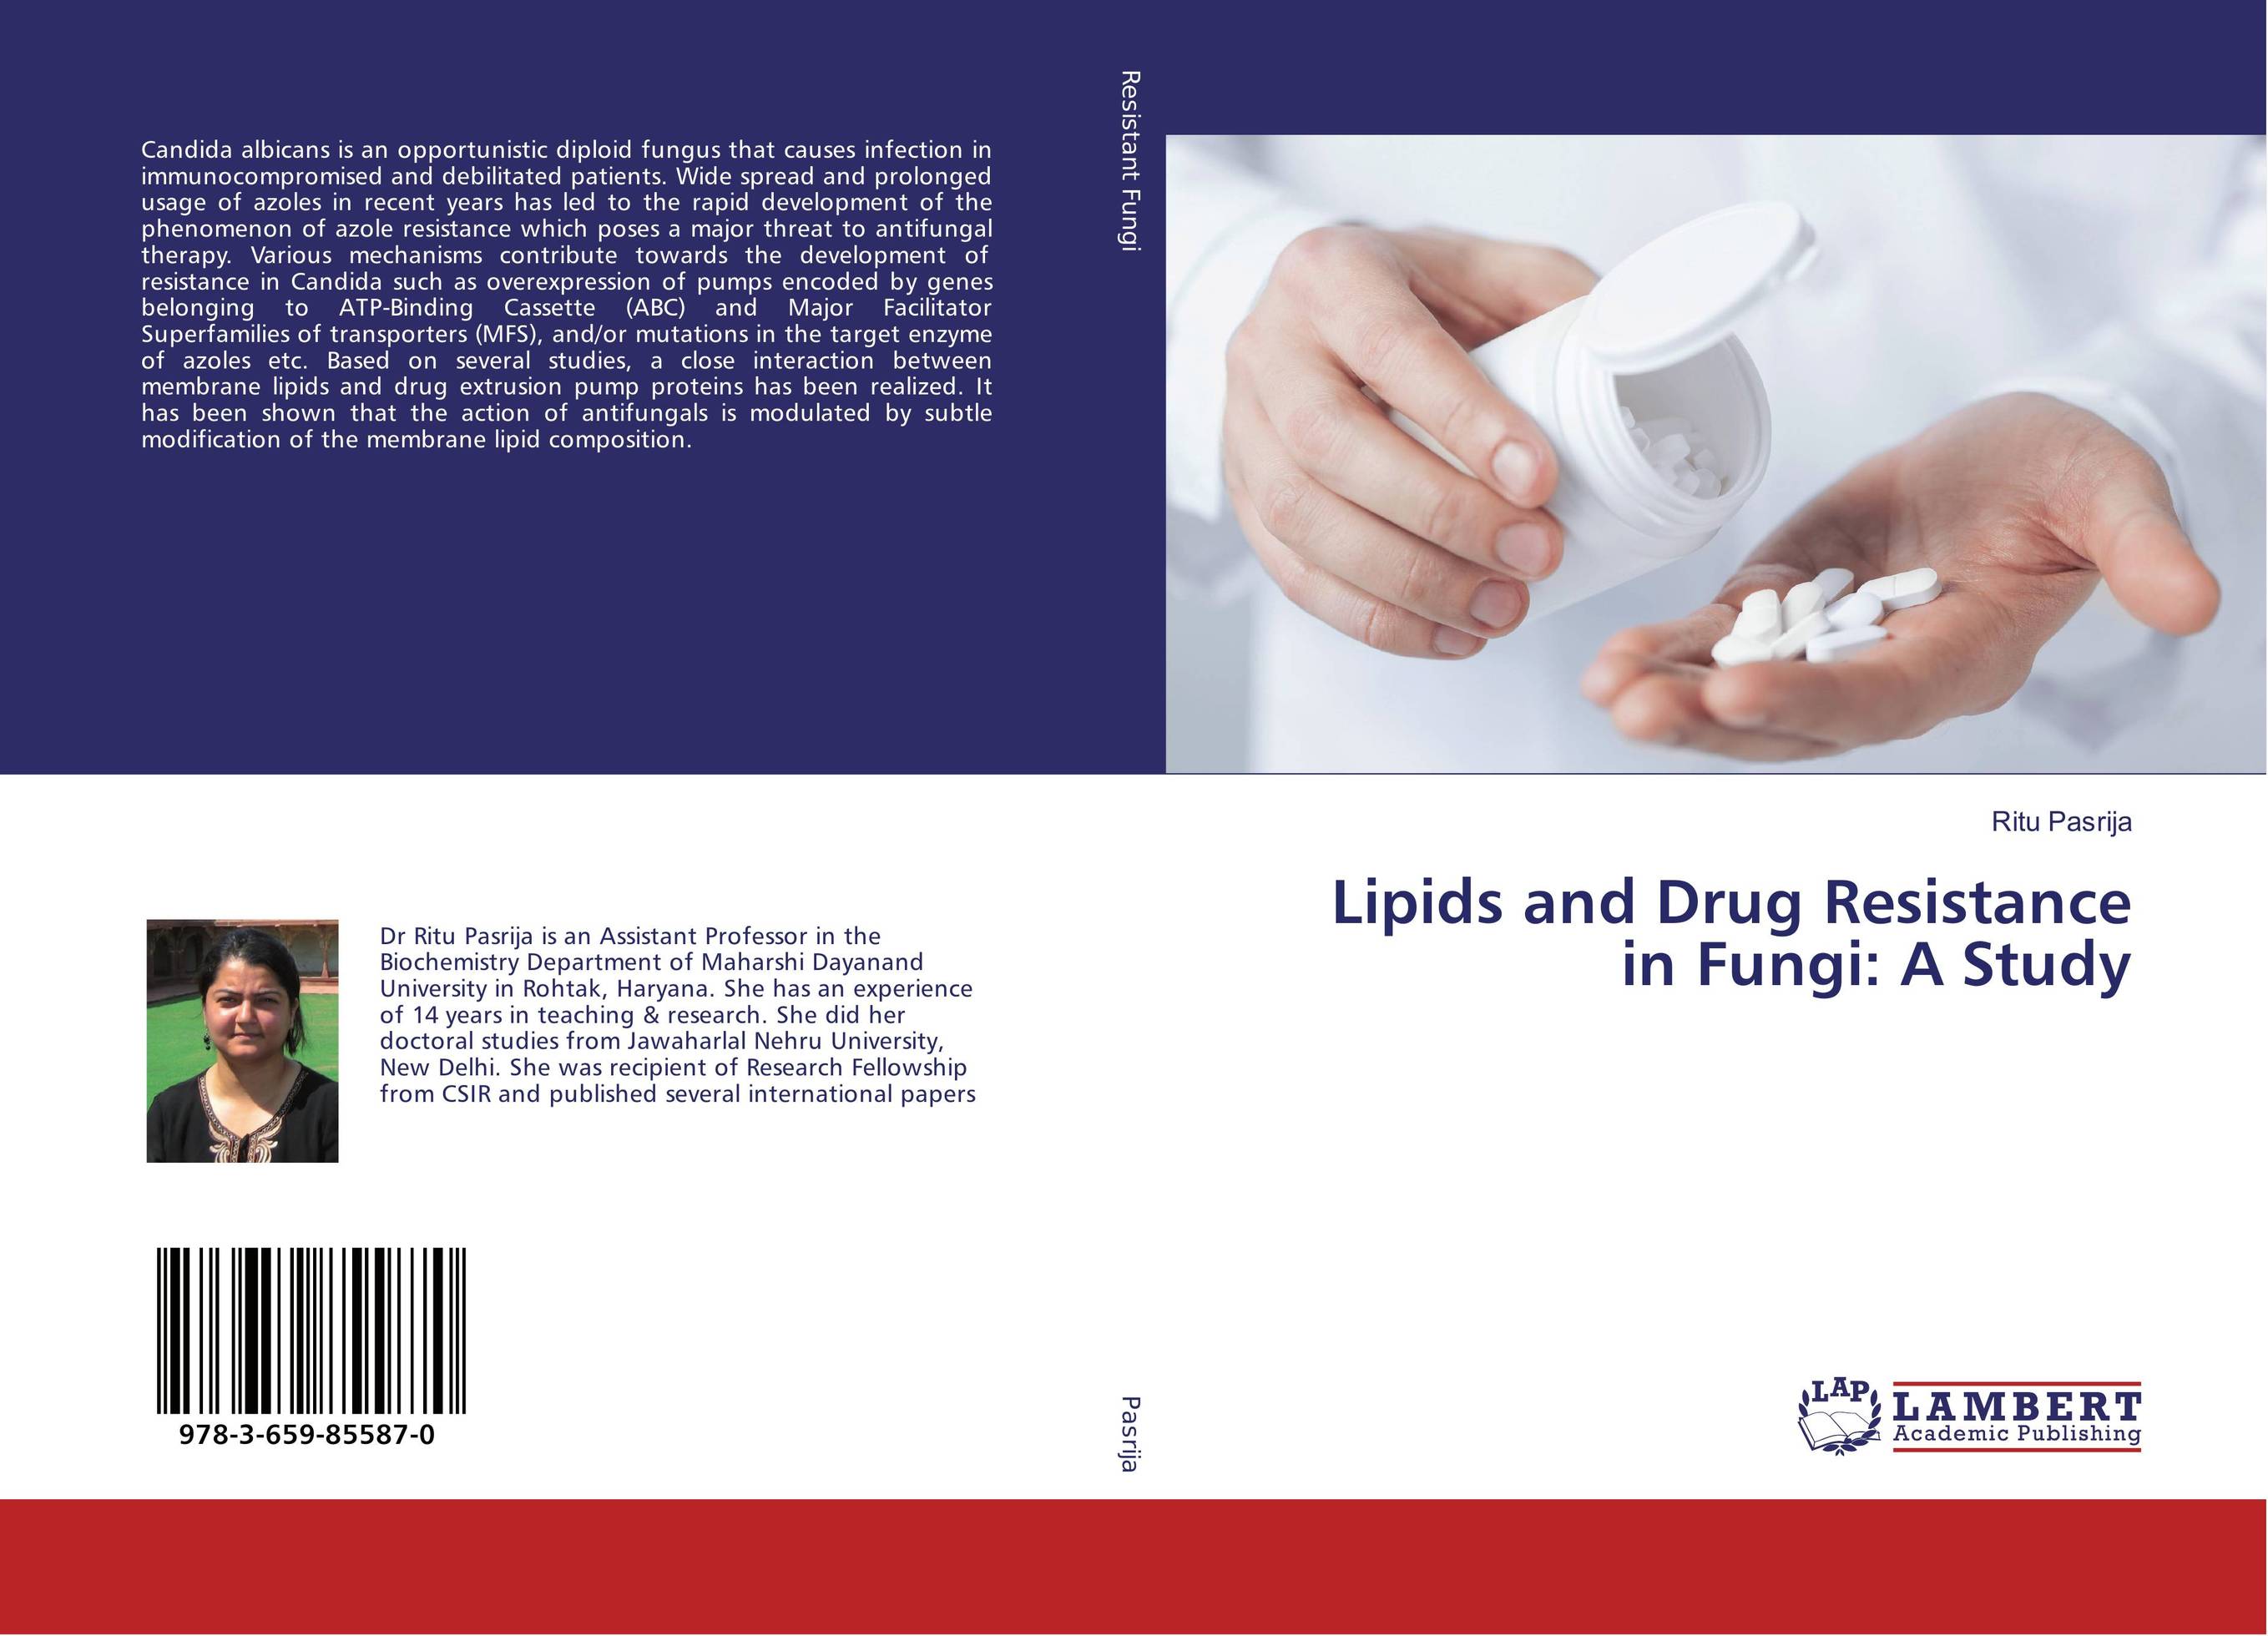 Lipids and Drug Resistance in Fungi: A Study